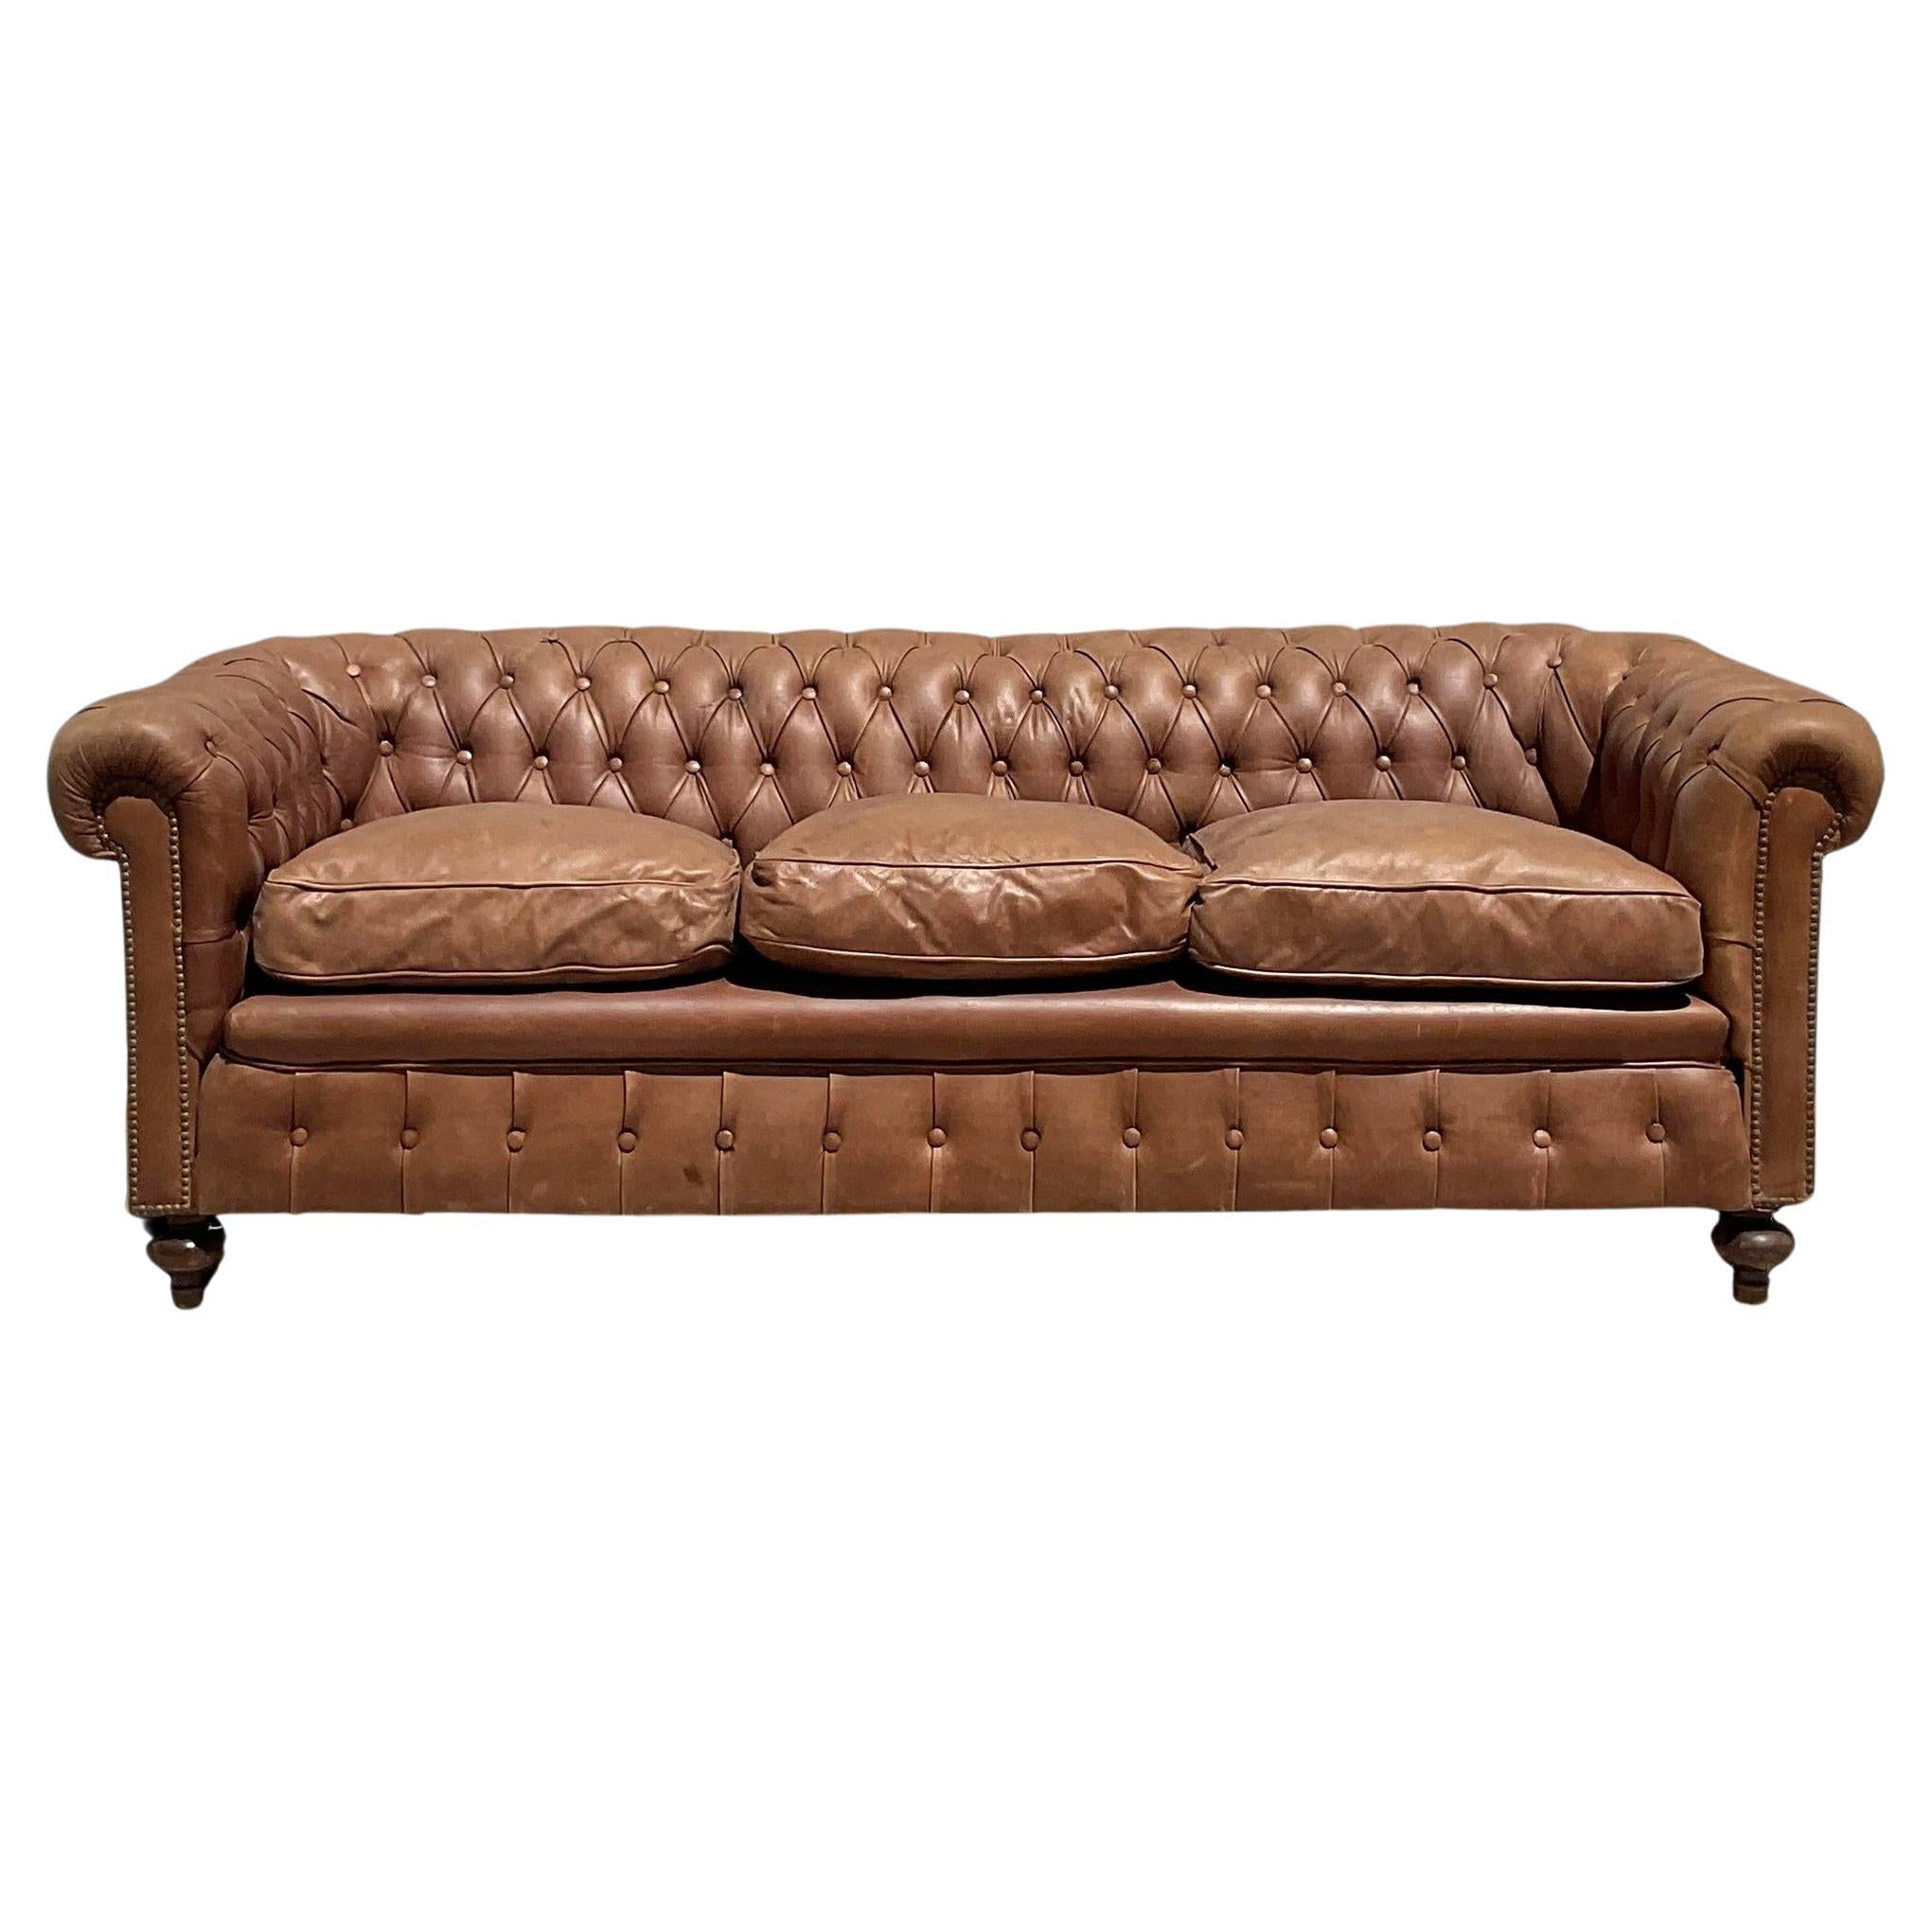 Vintage Boho Tufted Leather Chesterfield Sofa